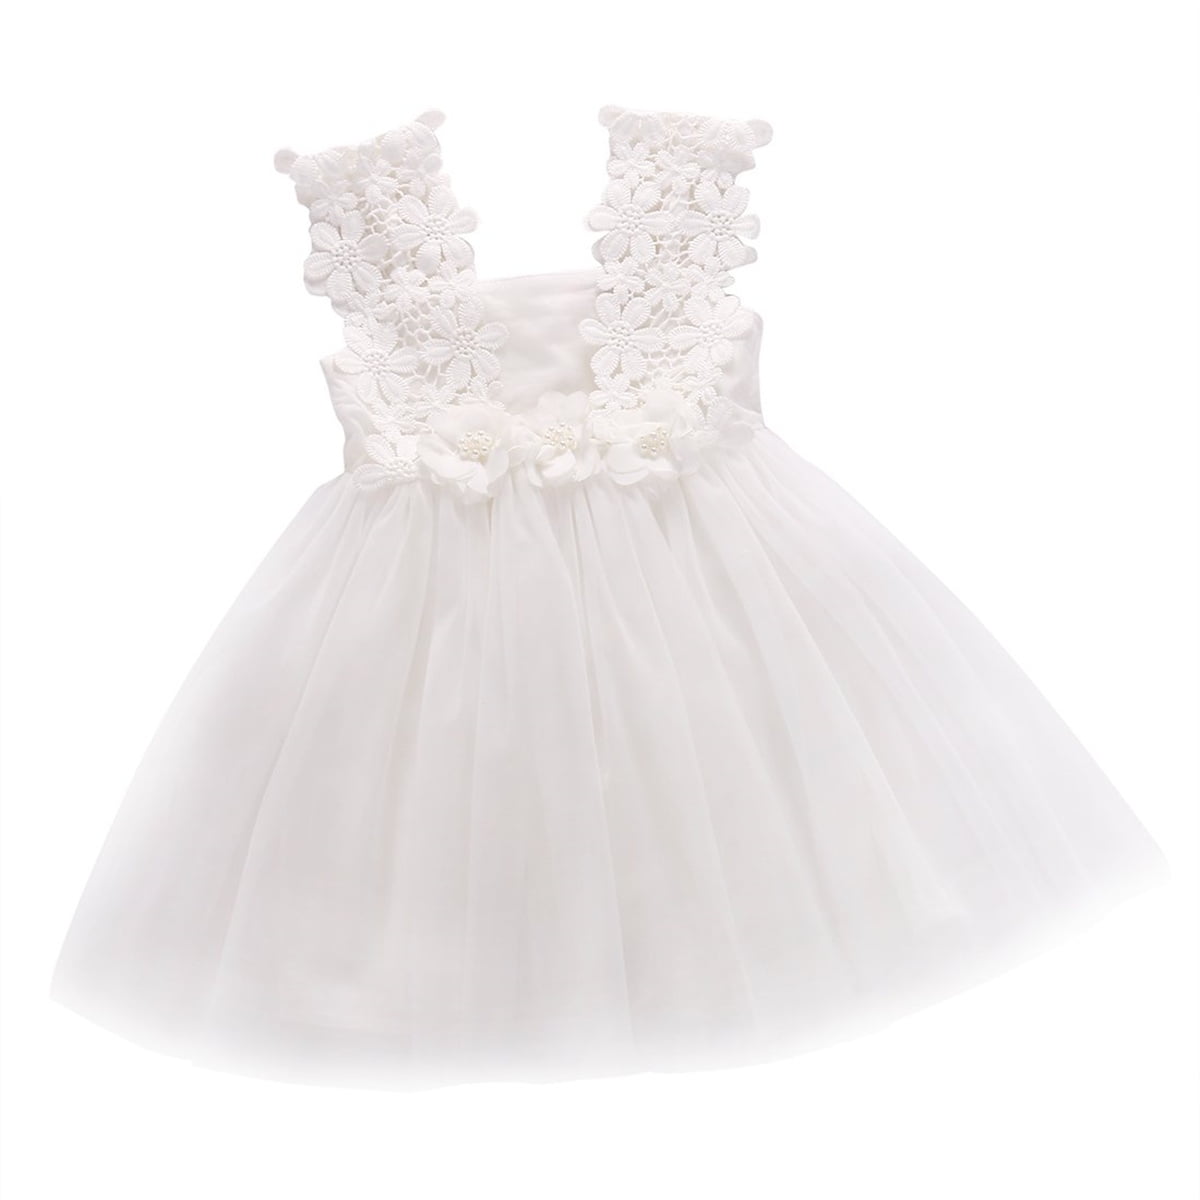 FOCUSNORM Baby Girl Dress Princess Party Pearl Lace Tulle Flower Tutu ...